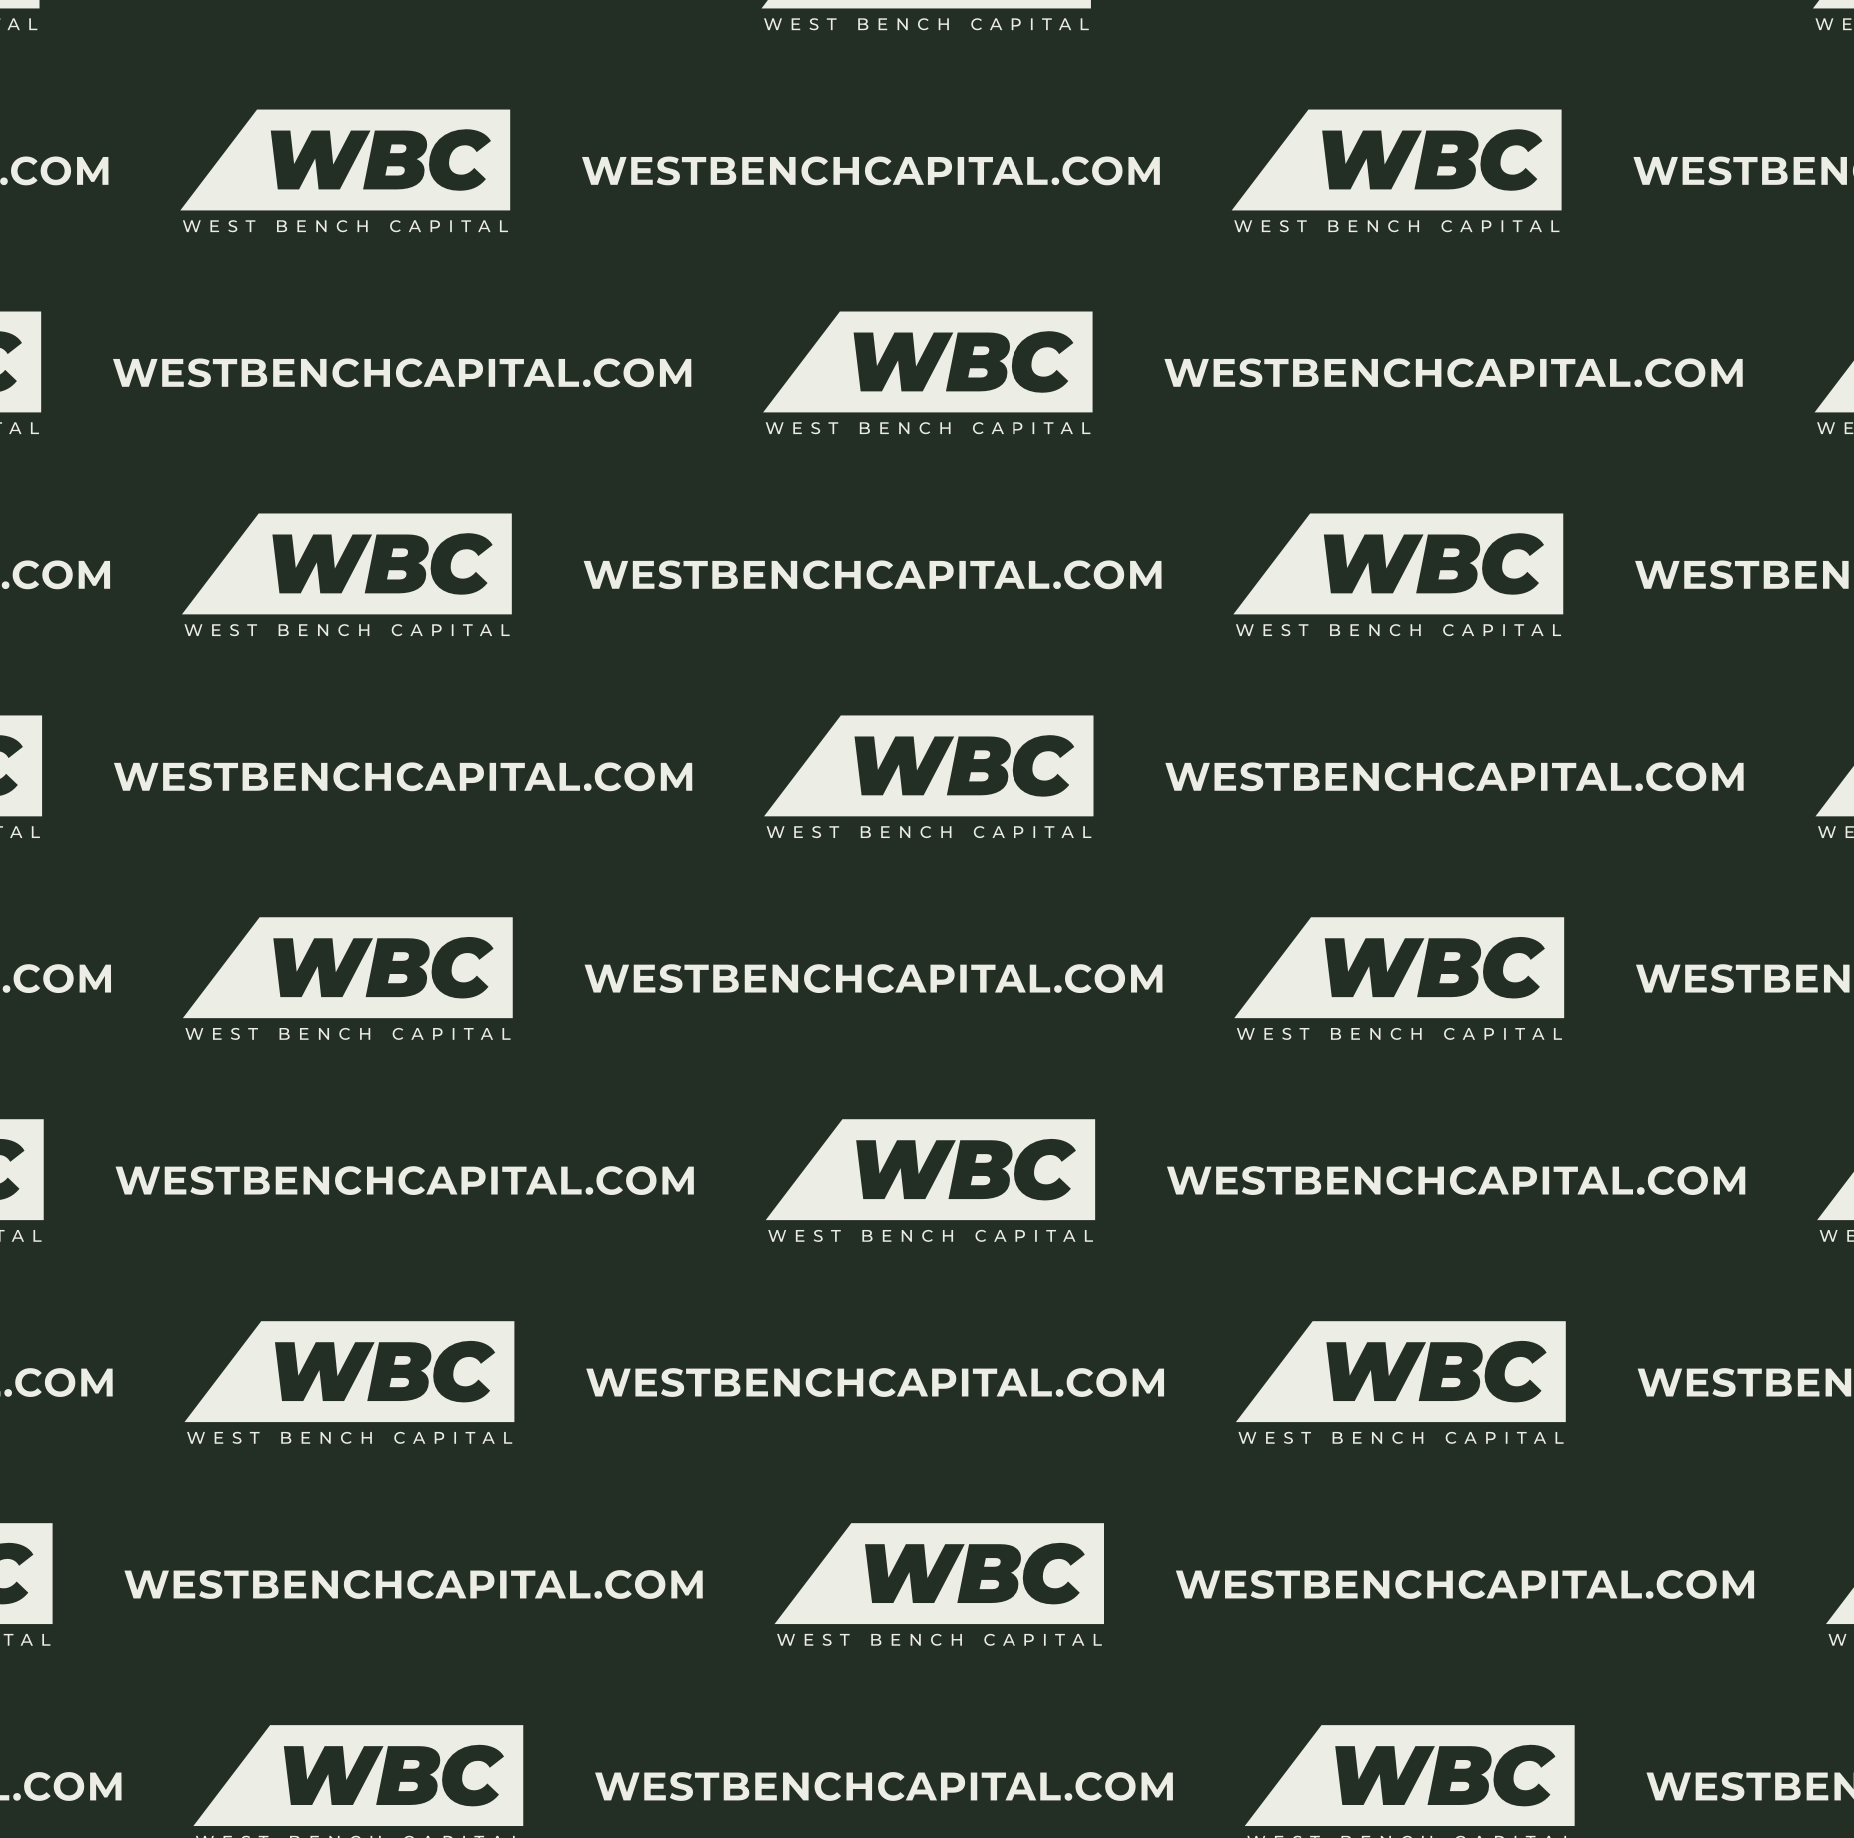 A black background with white wbc logos on it